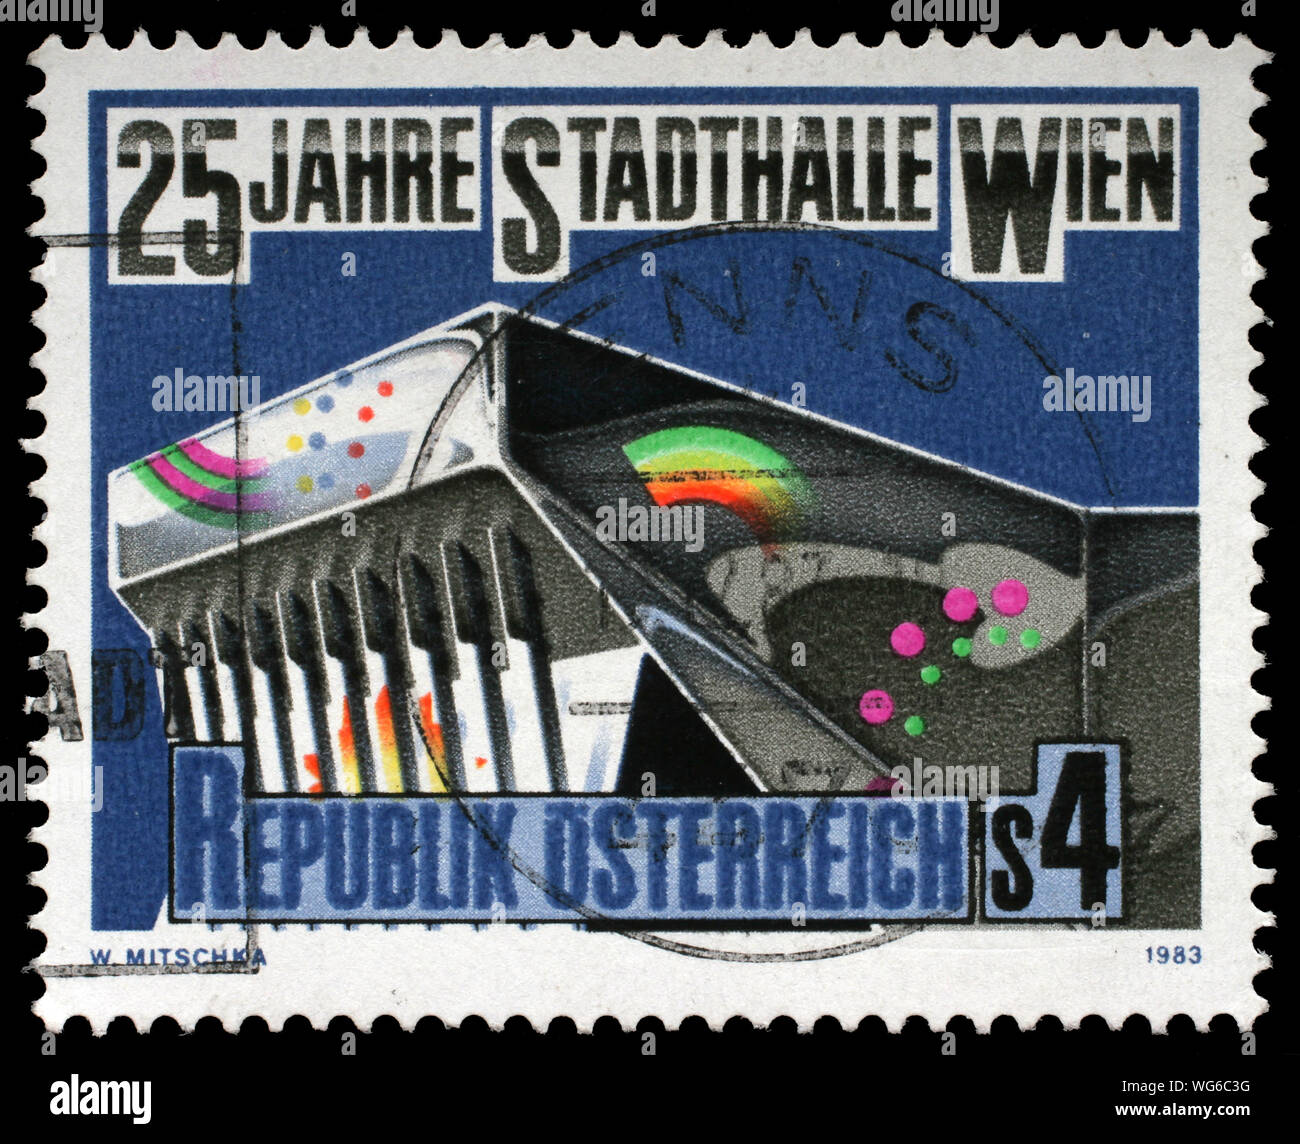 Stamp issued in the Austria shows the 25th Anniversary of Vienna Stadthalle, circa 1983. Stock Photo